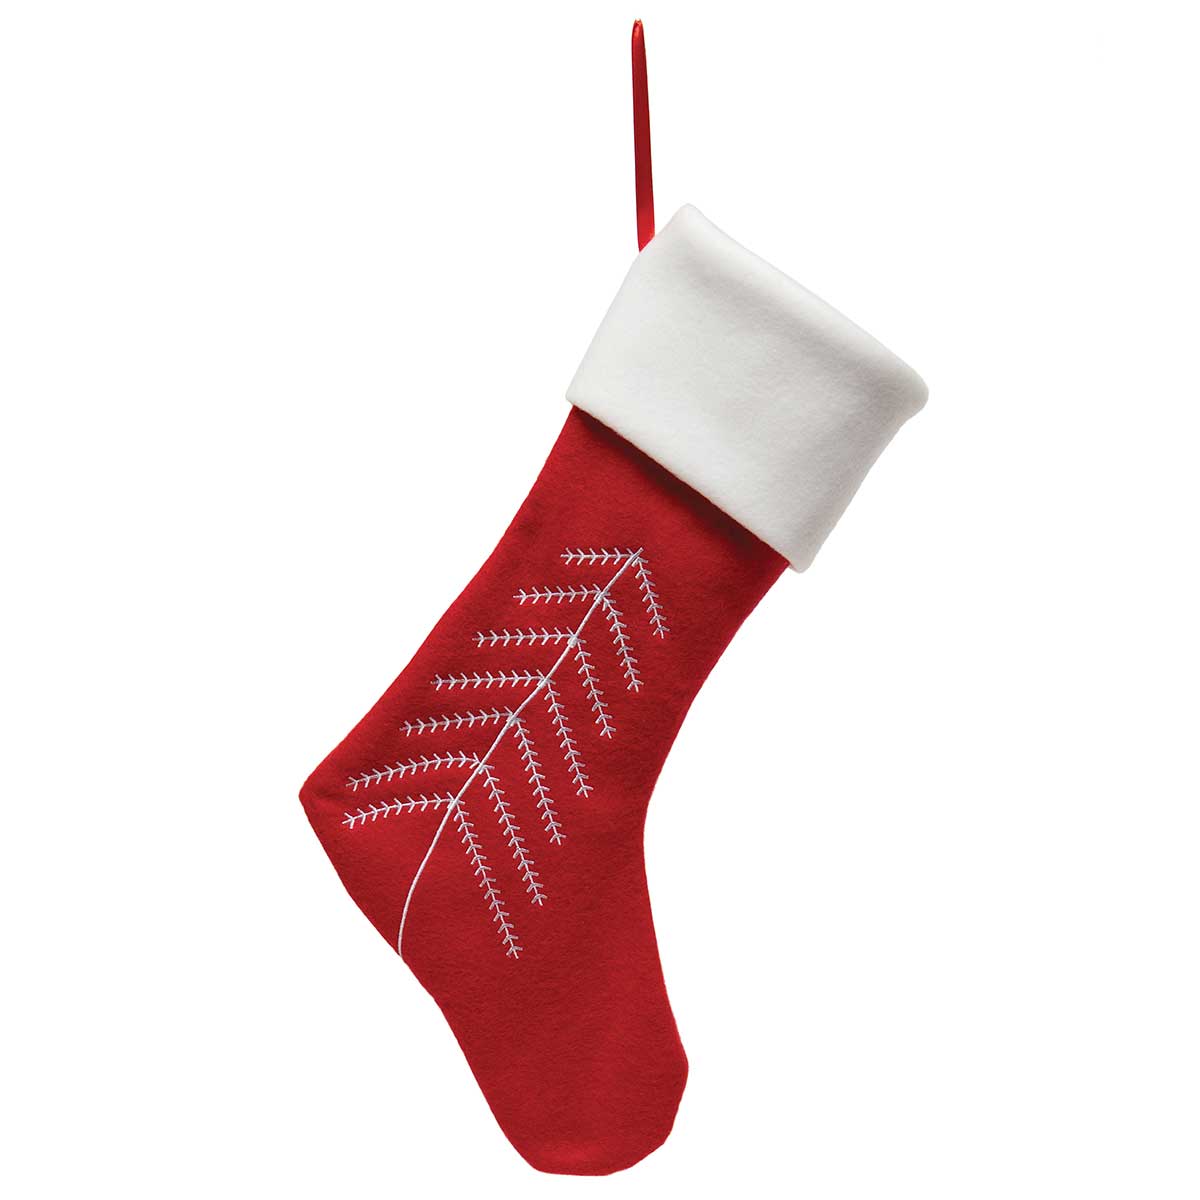 !SCANDIA STOCKING RED/WHITE WITH EMBROIDERED TREE DESIGN v22